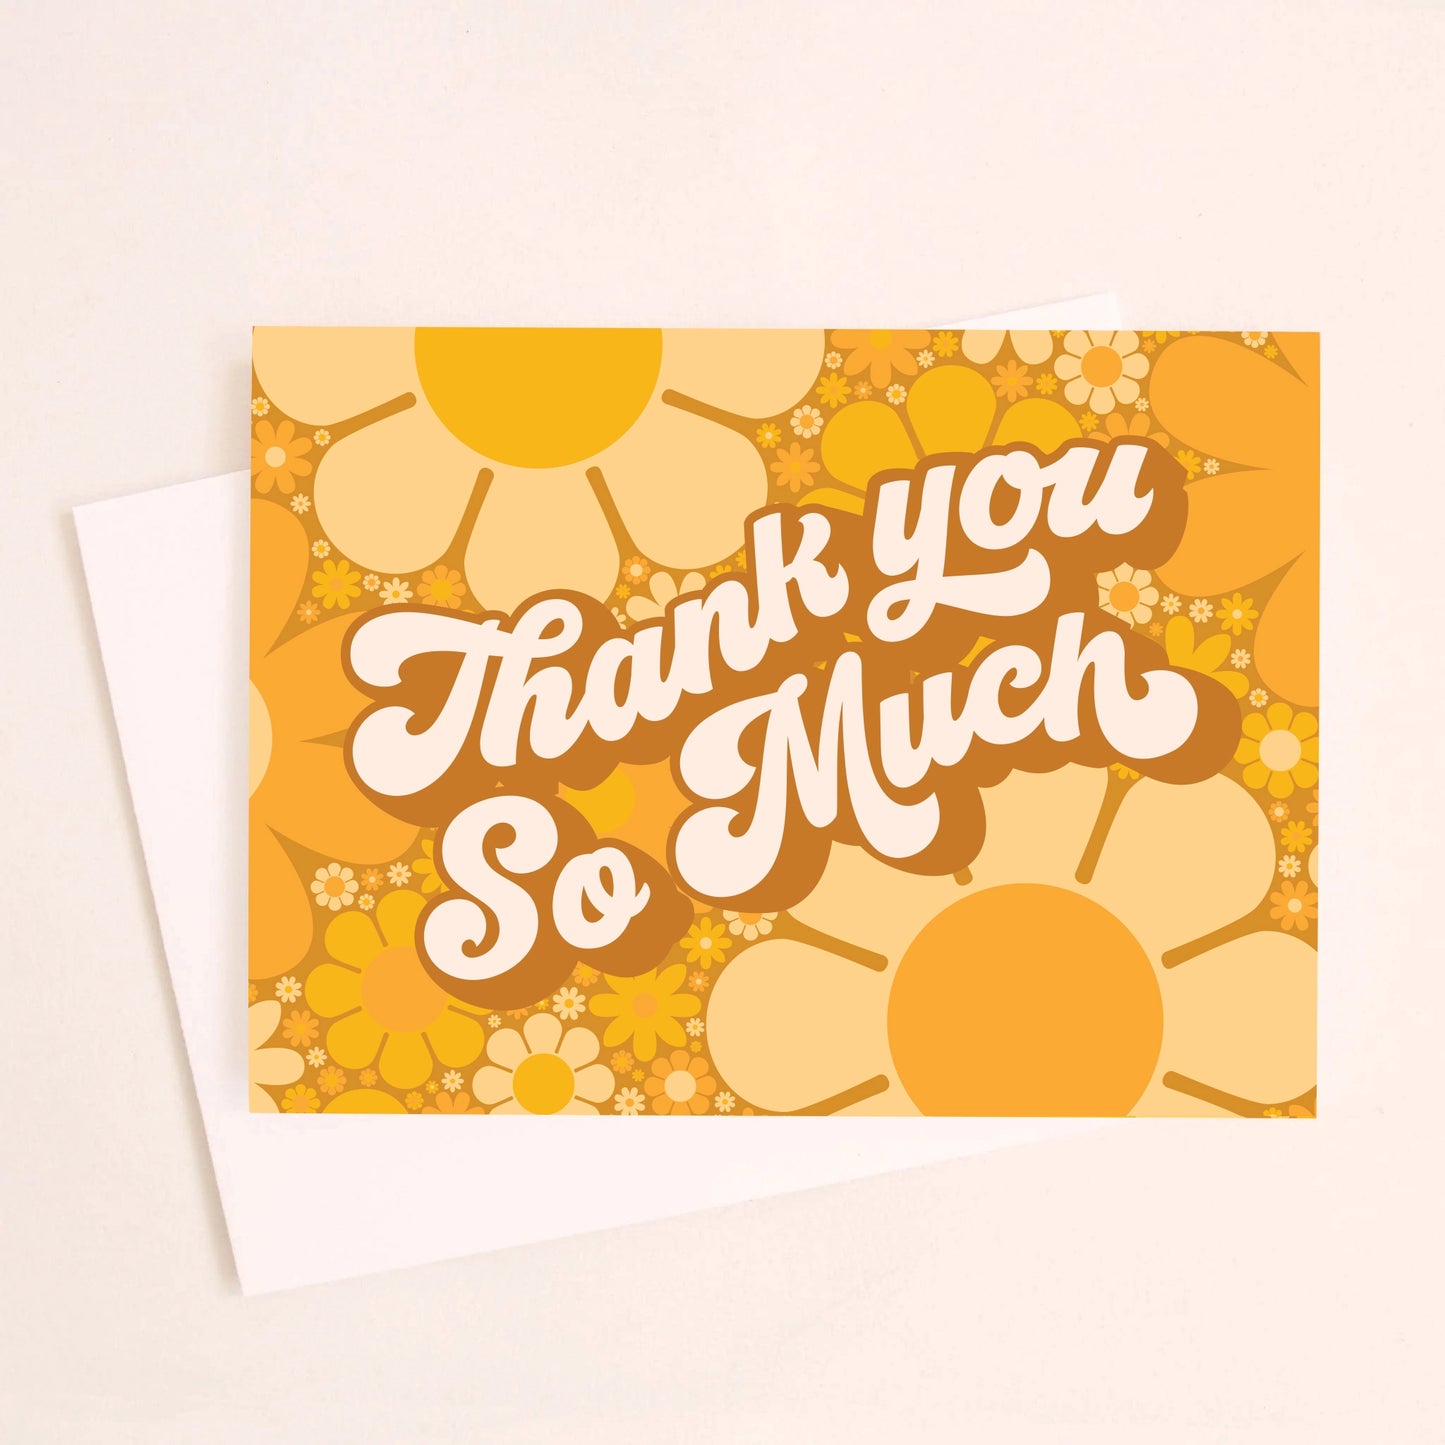 On an ivory background is a daisy printed thank you card with shades of orange and yellow along with white text in the center that reads, "Thank You So Much". 